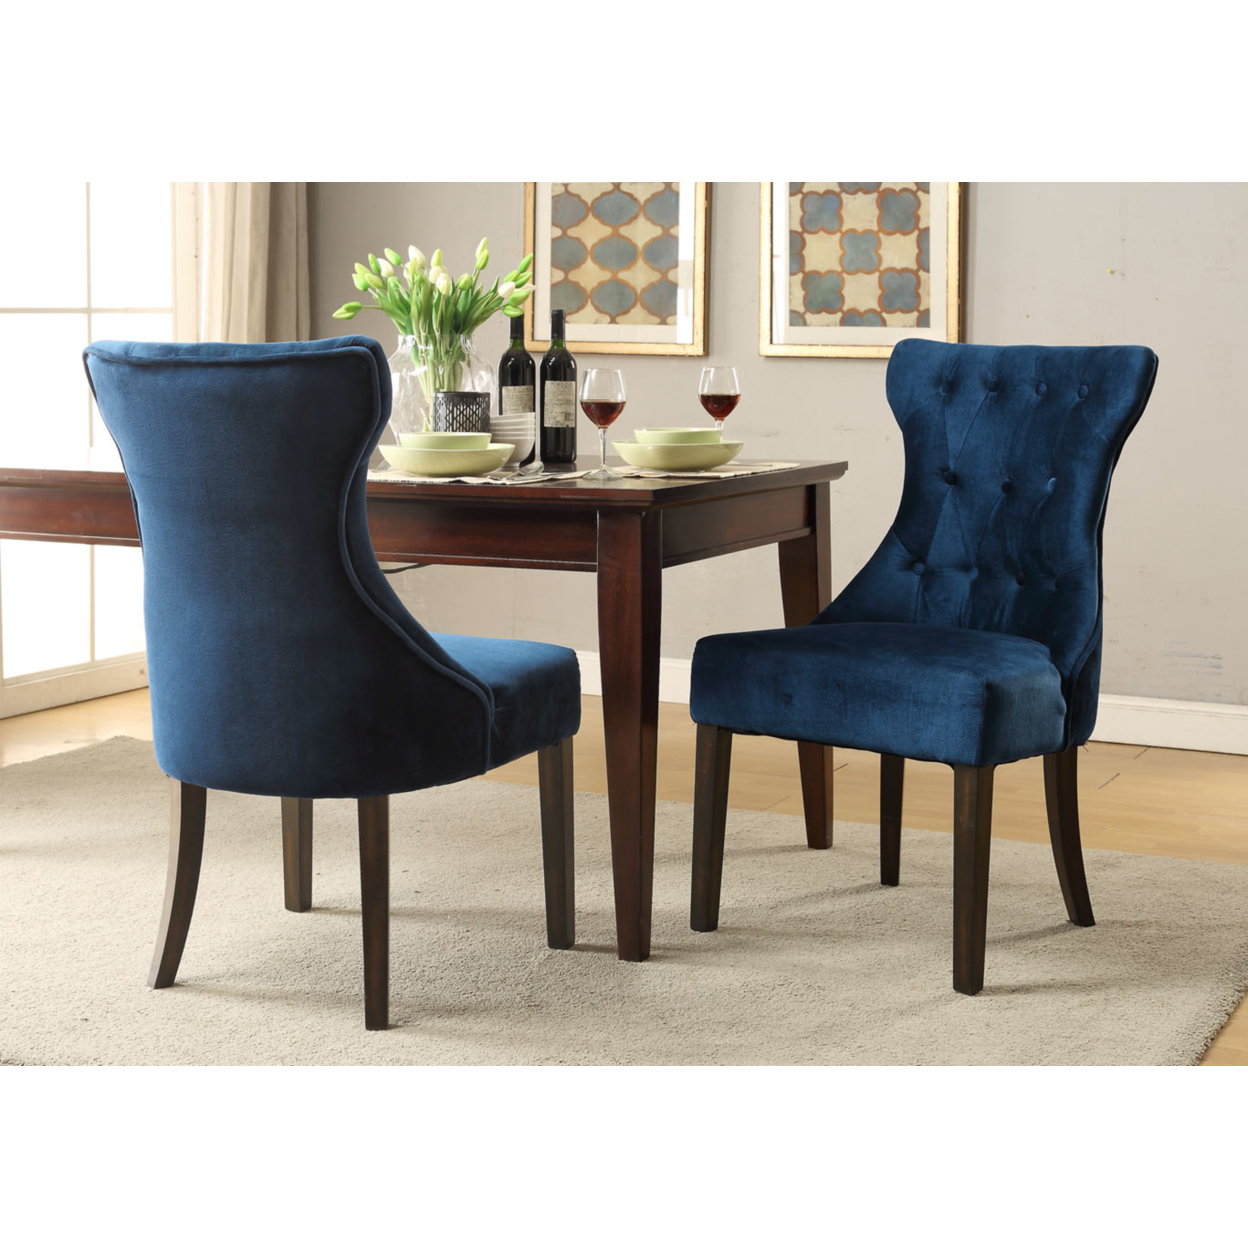 Doyle Velvet Button Tufted Tapered Rubberwood Legs Dining Chair, Set Of 2 - Navy